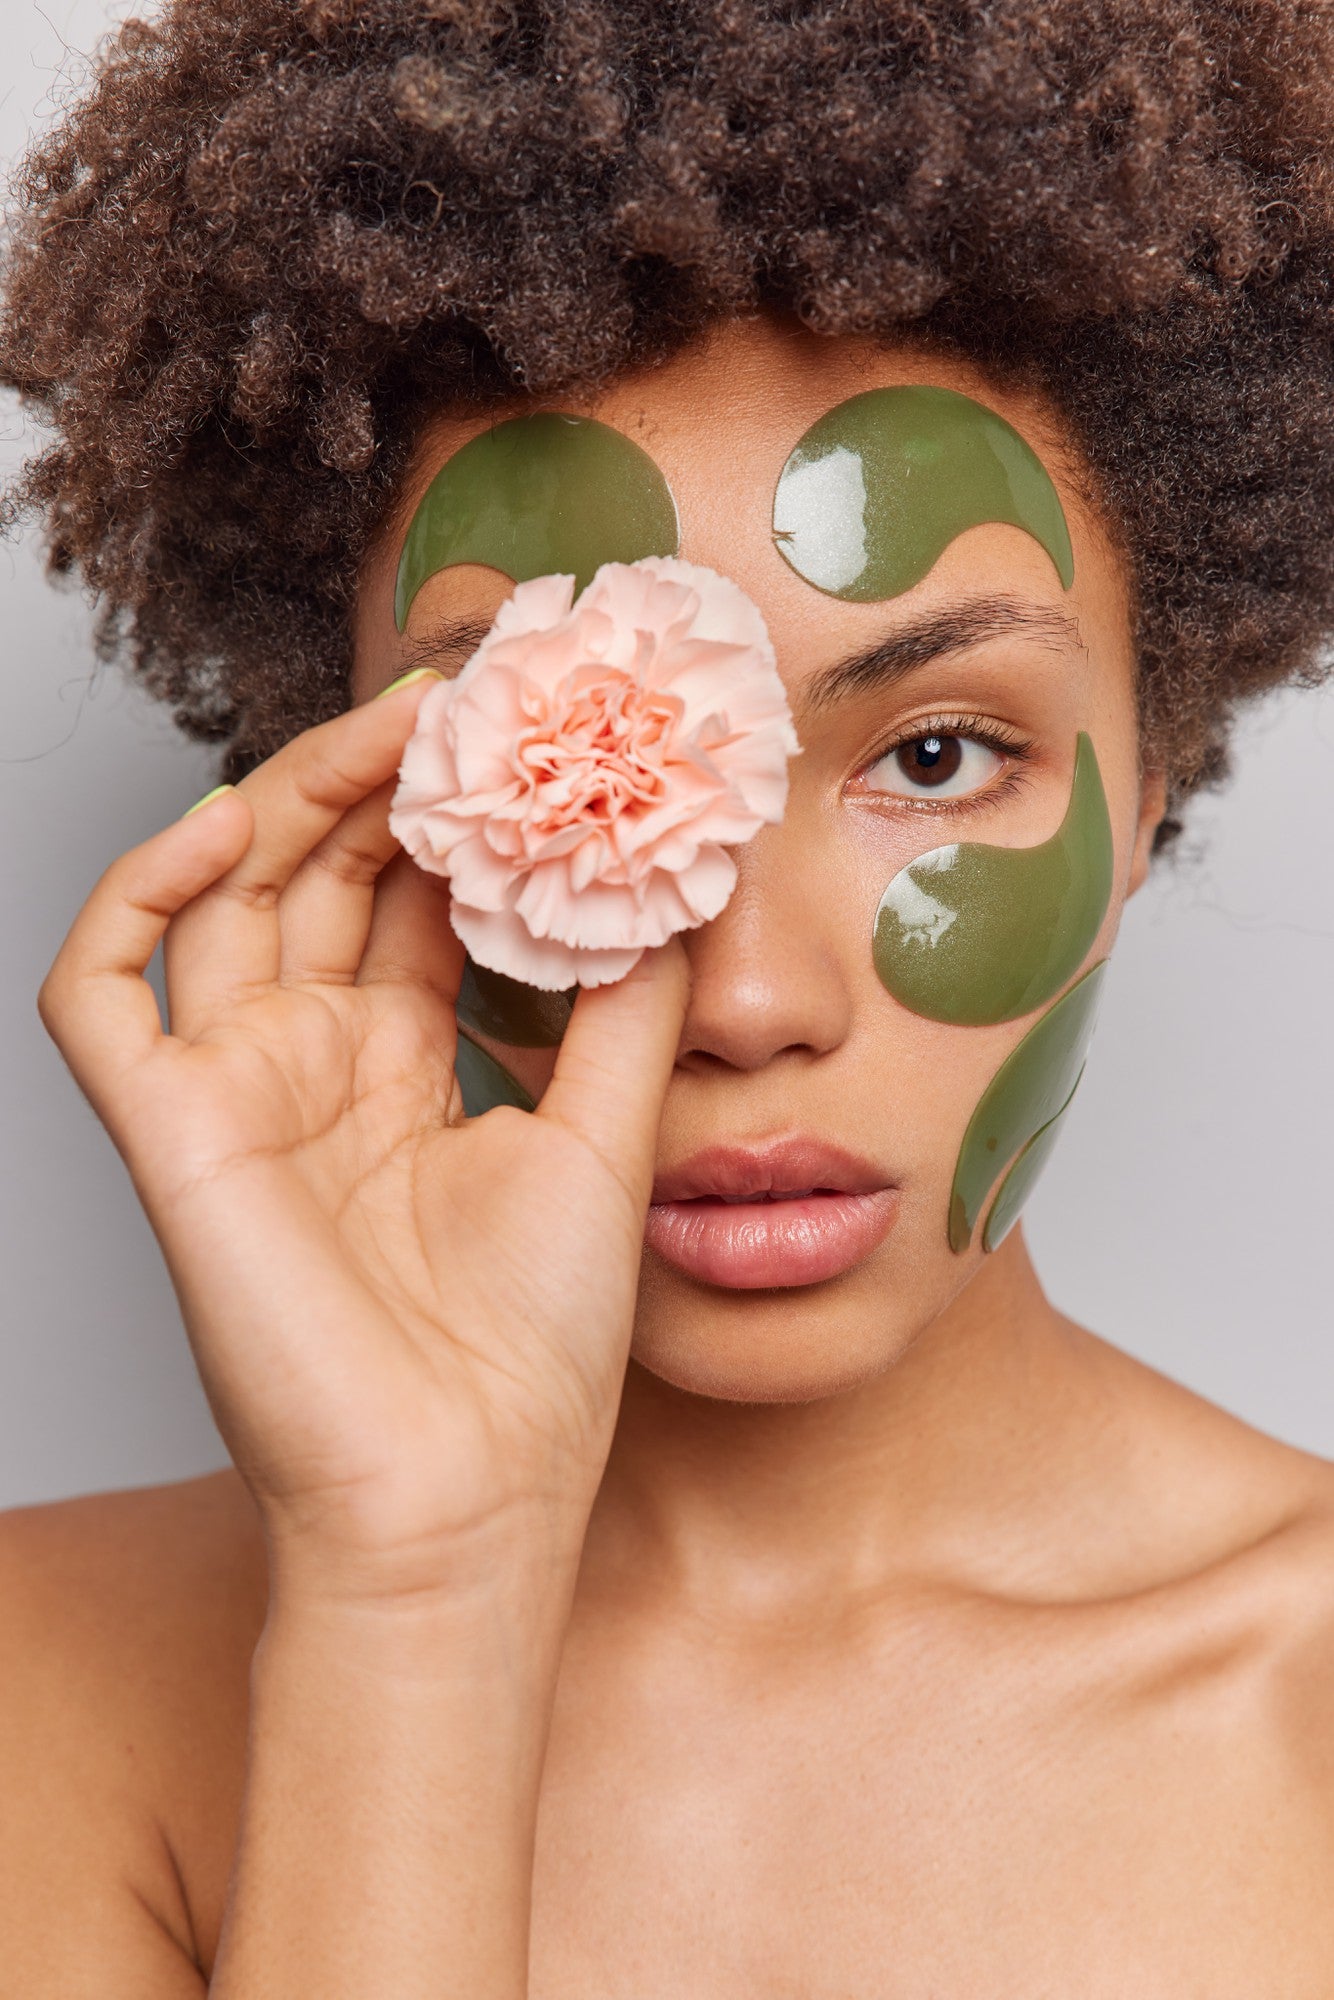 woman-uses-natural-beauty-products-holds-flower-eye-applies-collagen-green-patches-face-stands-shirtless-poses-indoor.jpg